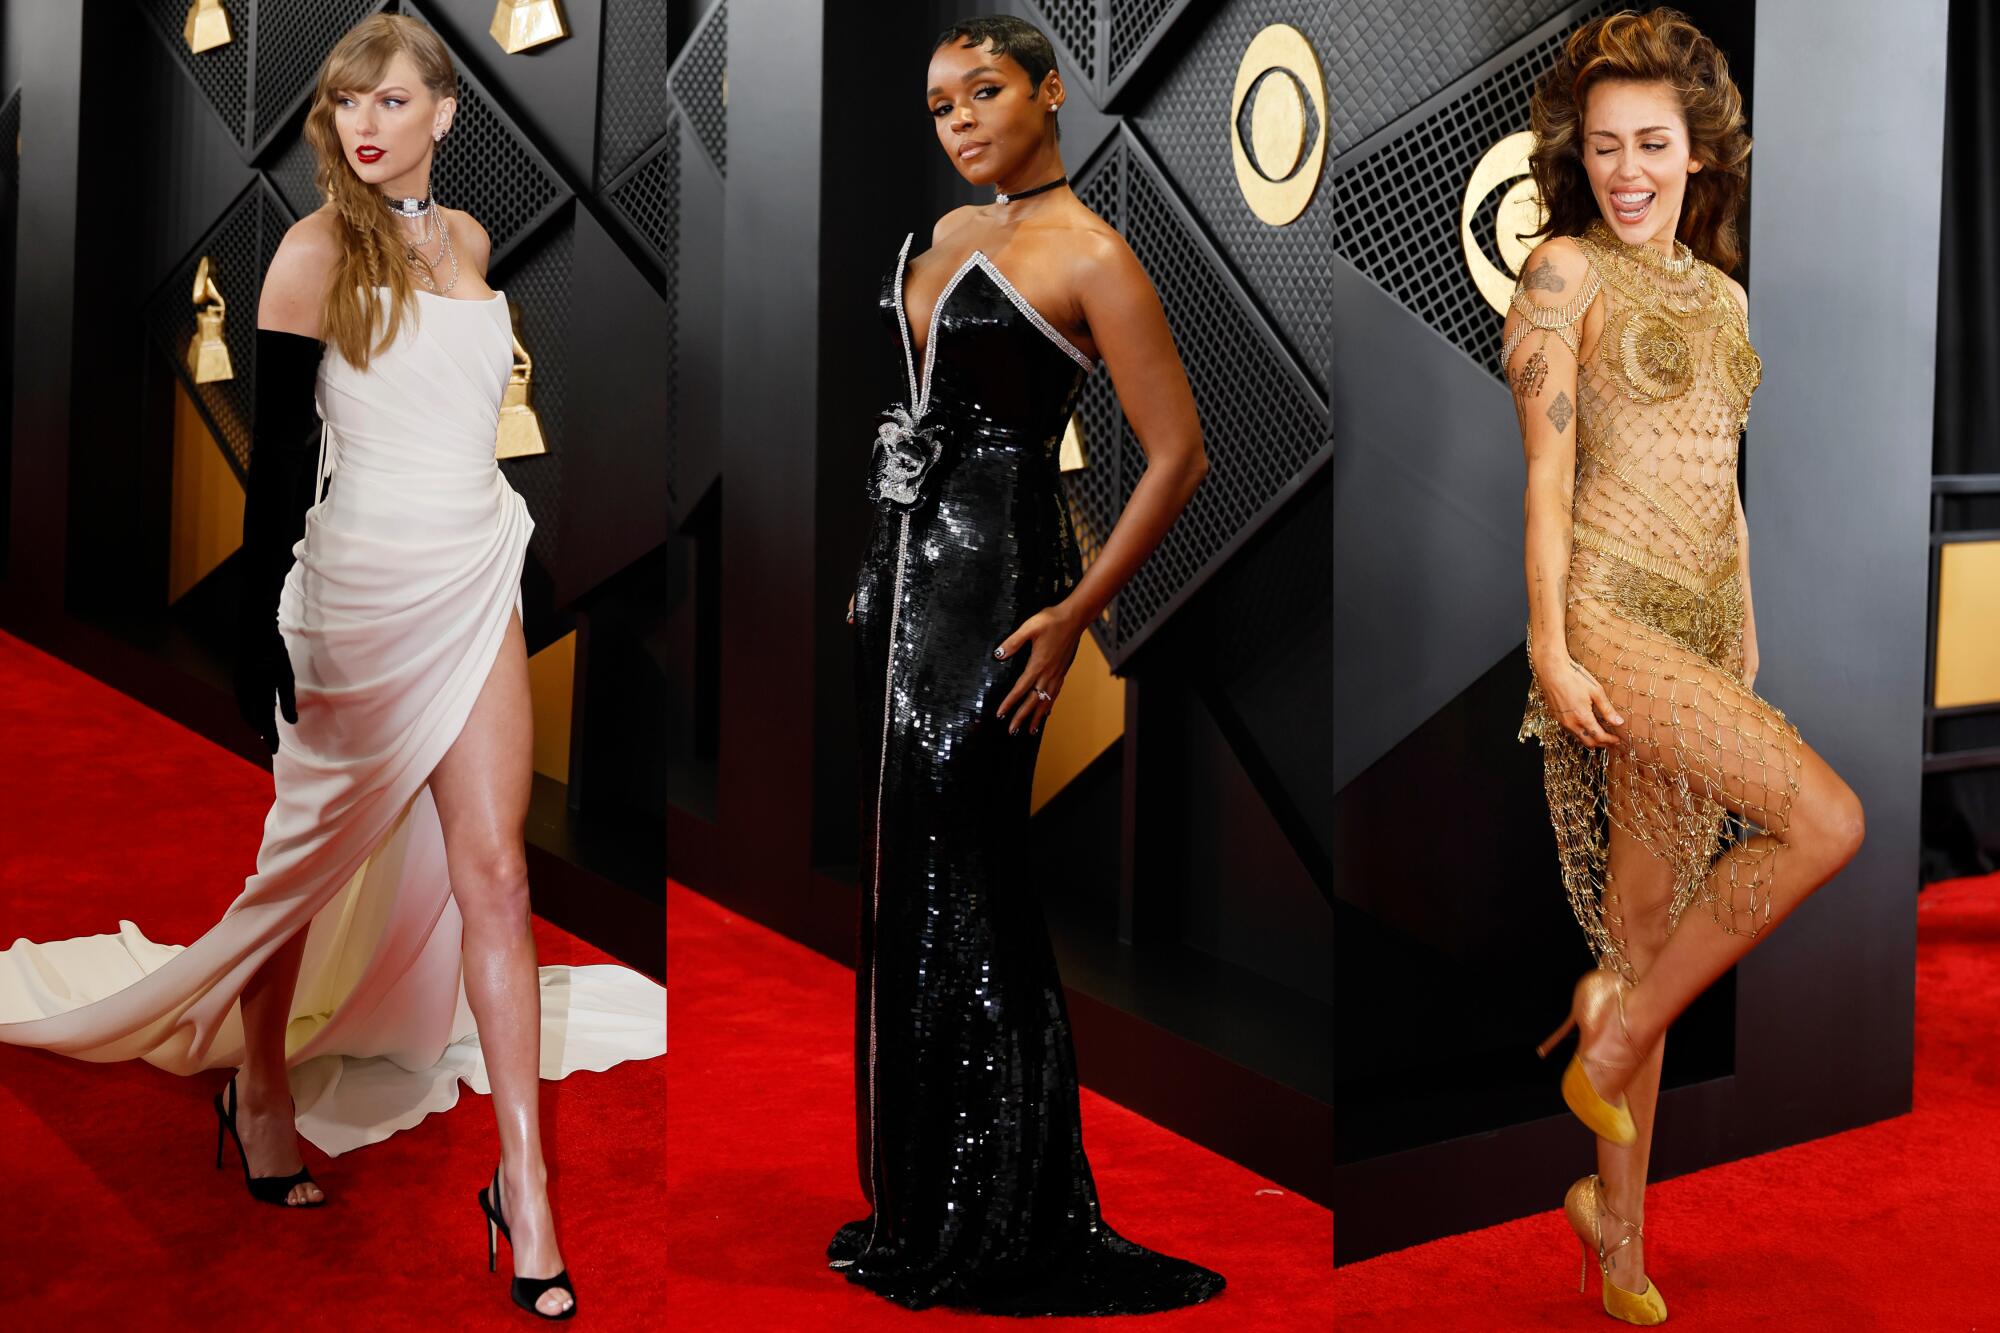 Taylor Swift, Janelle Monae and Miley Cyrus wear white, black and gold gowns 